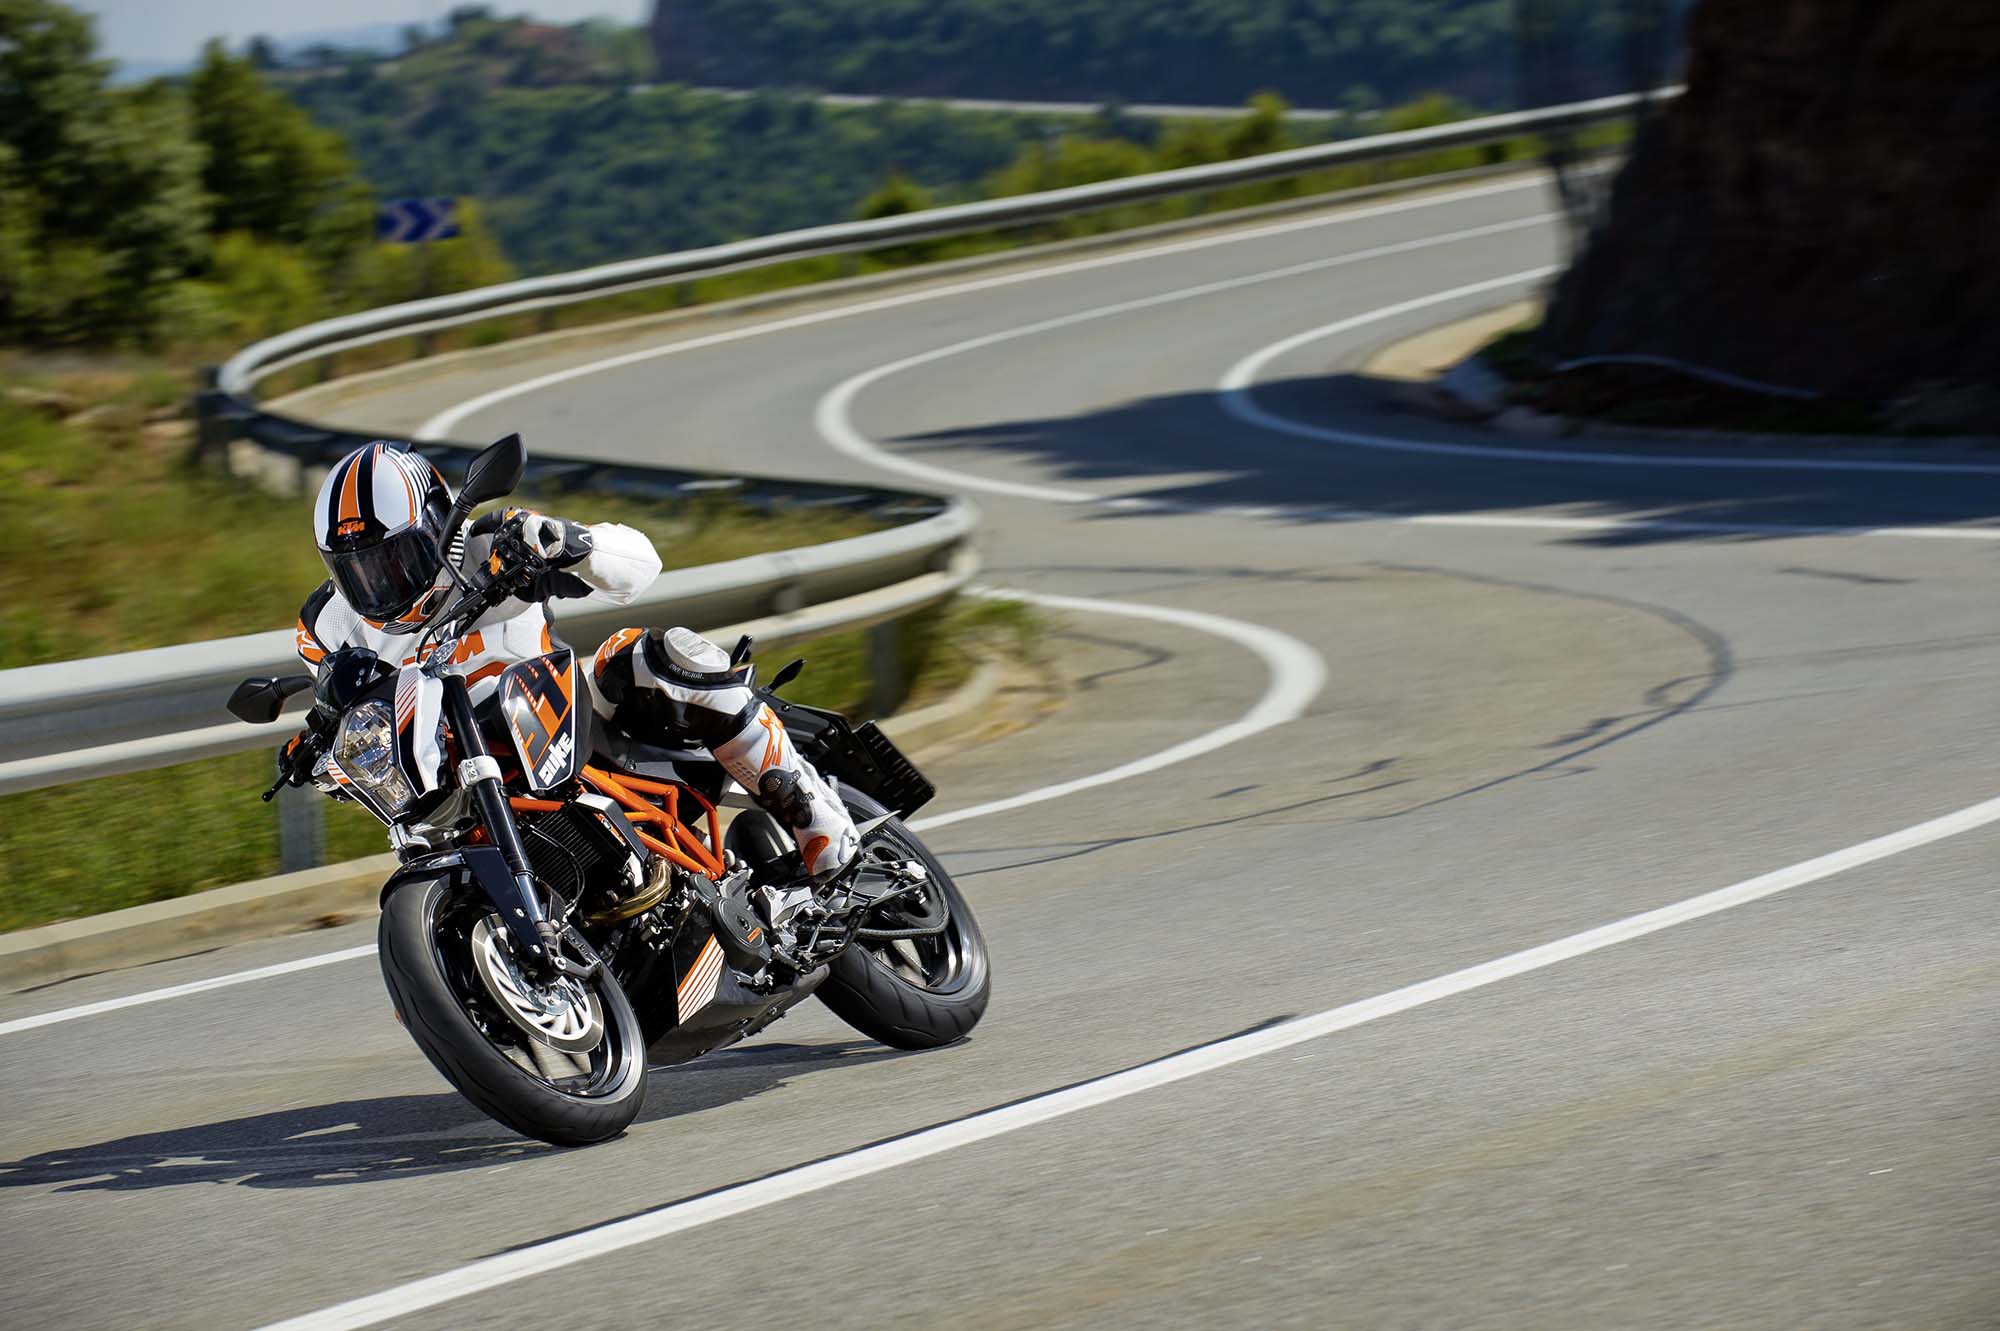 More High Res Photo Of The KTM 390 Duke & Rubber